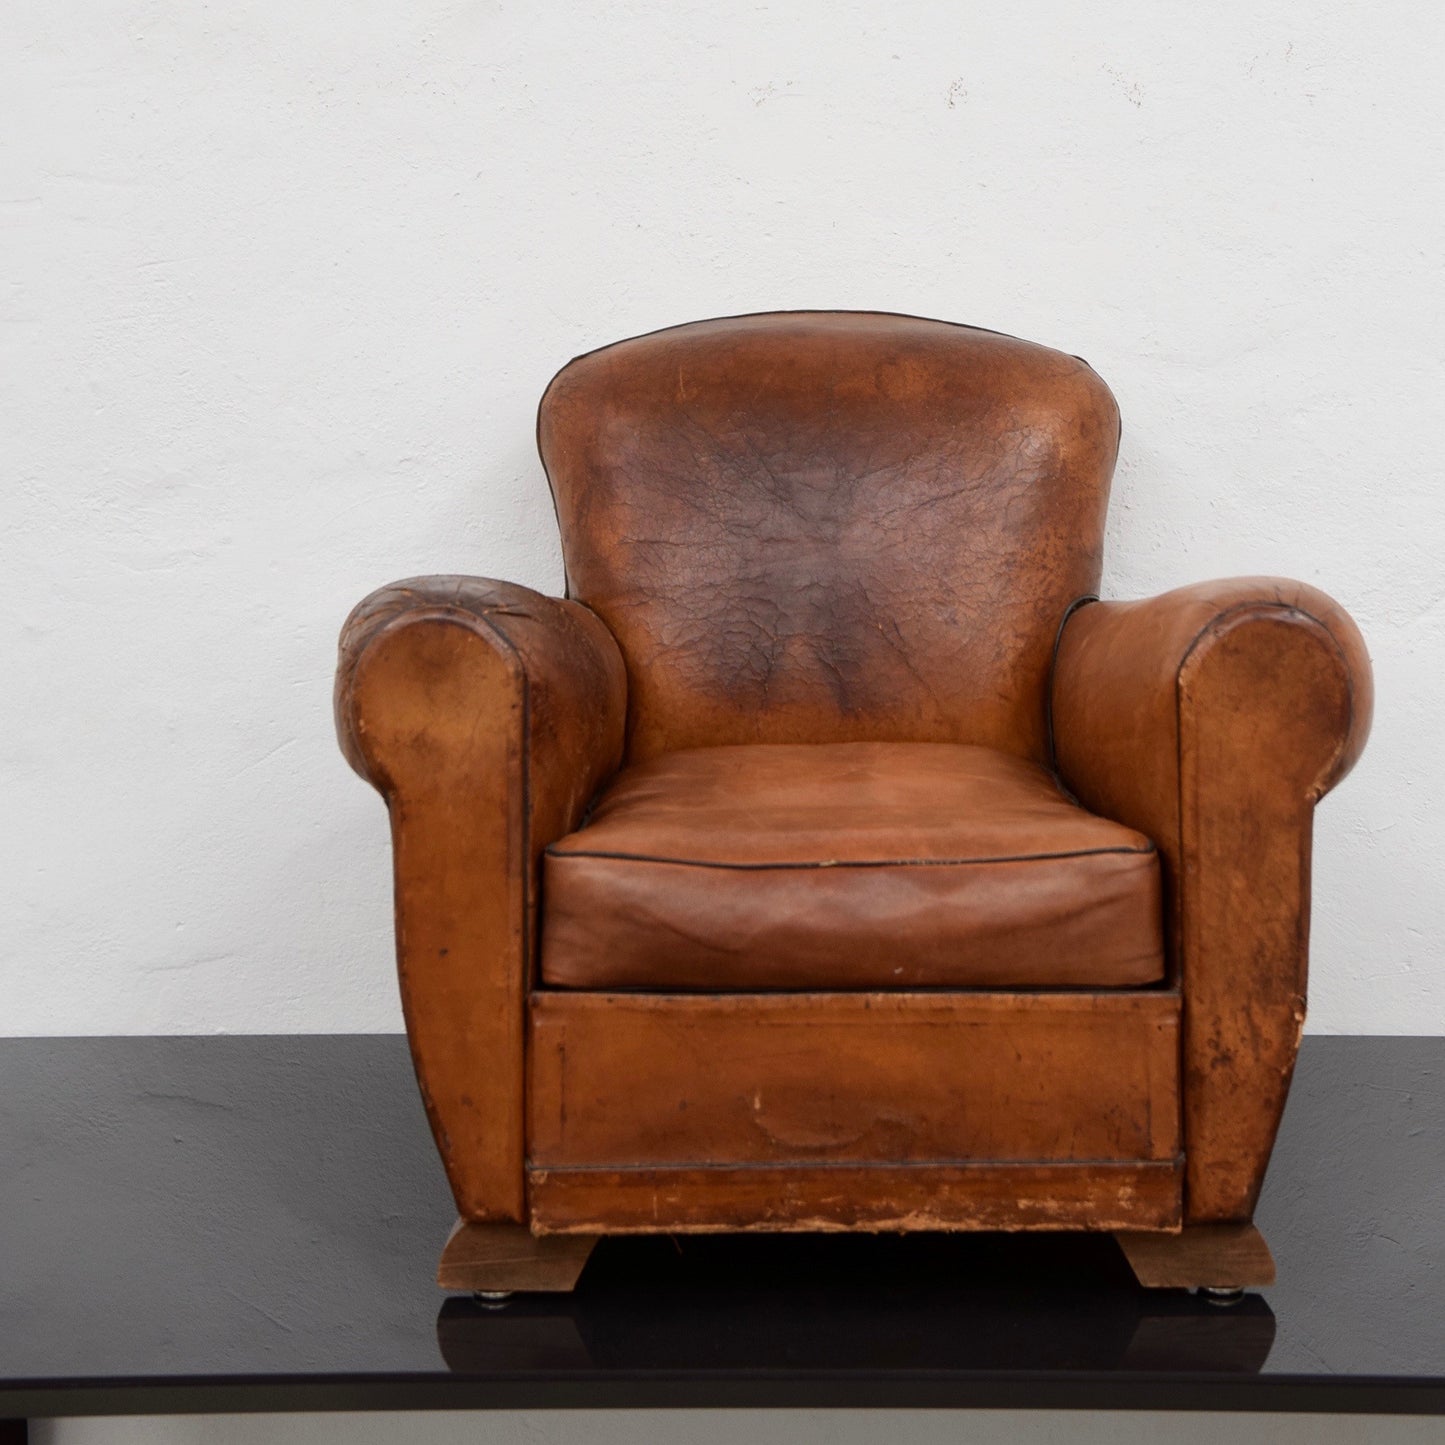 Load image into Gallery viewer, Antique French Art Deco Club Chair c1940 through Country Trader (2 Available)
